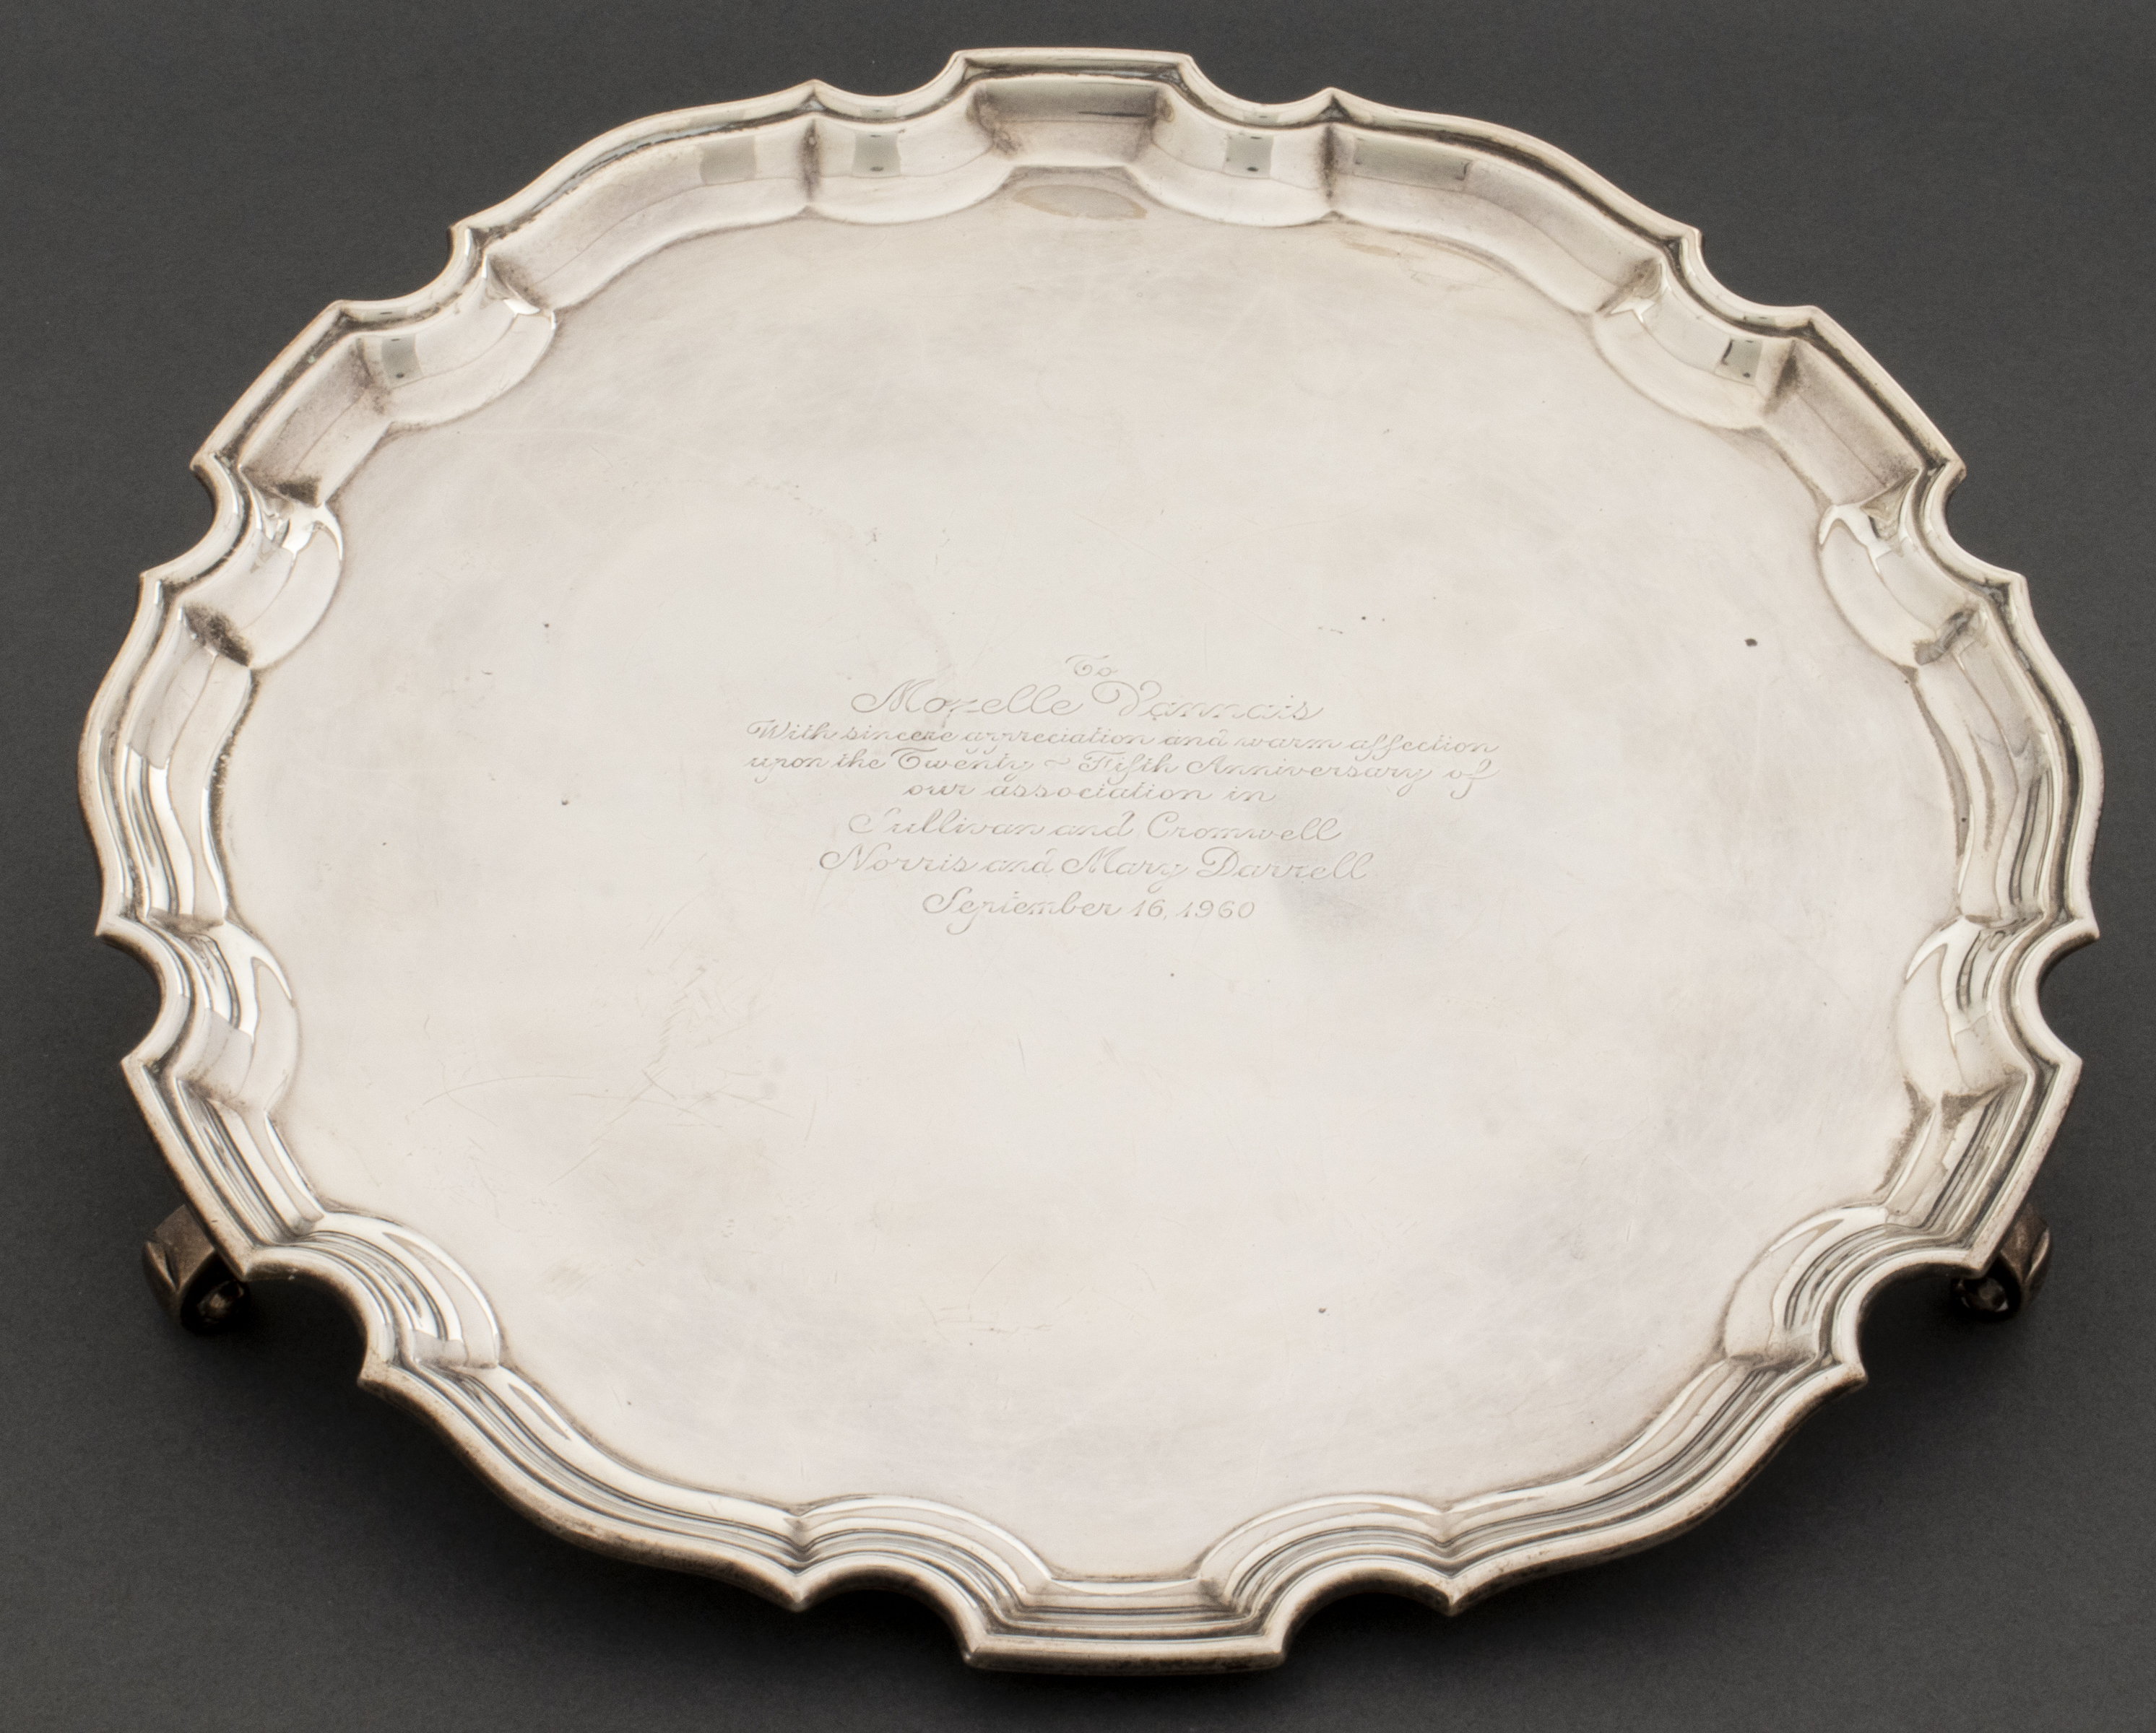 TIFFANY & CO. STERLING SILVER SALVER